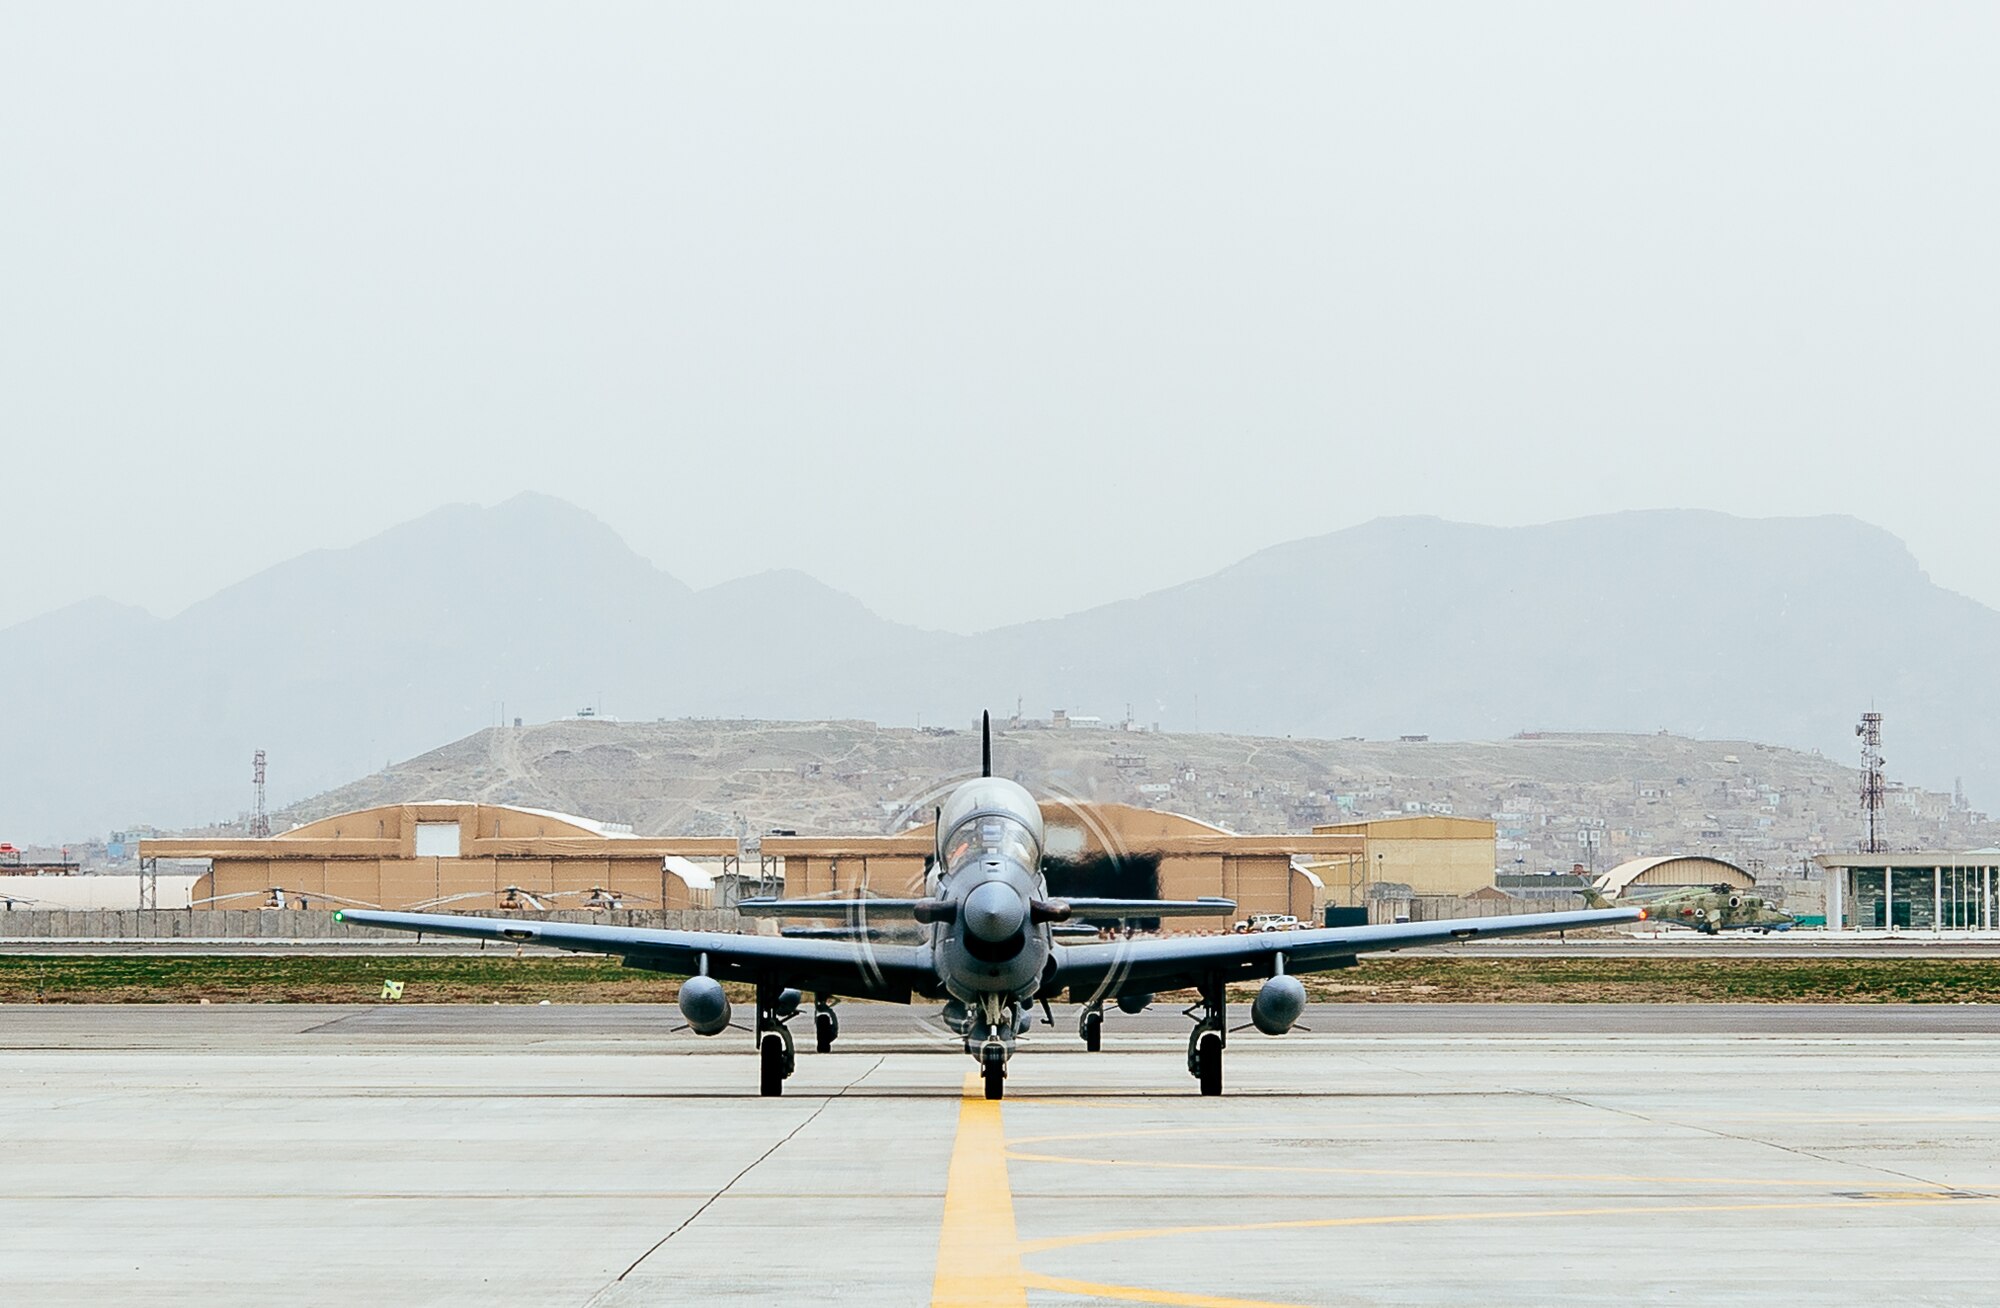 Four A-29 Super Tucanos arrive in Kabul, Afghanistan, March 20, 2017, before the beginning of the 2017 fighting season. The aircraft will bolster the Afghan Air Force's inventory from eight to 12 A-29s in country. Airmen from Train, Advise, Assist Command-Air, as part of Resolute Support Mission, work in tandem with their Afghan counterparts fostering a working relationship and fortifying confidence in the mission. (U.S. Air Force photo by Senior Airman Jordan Castelan)